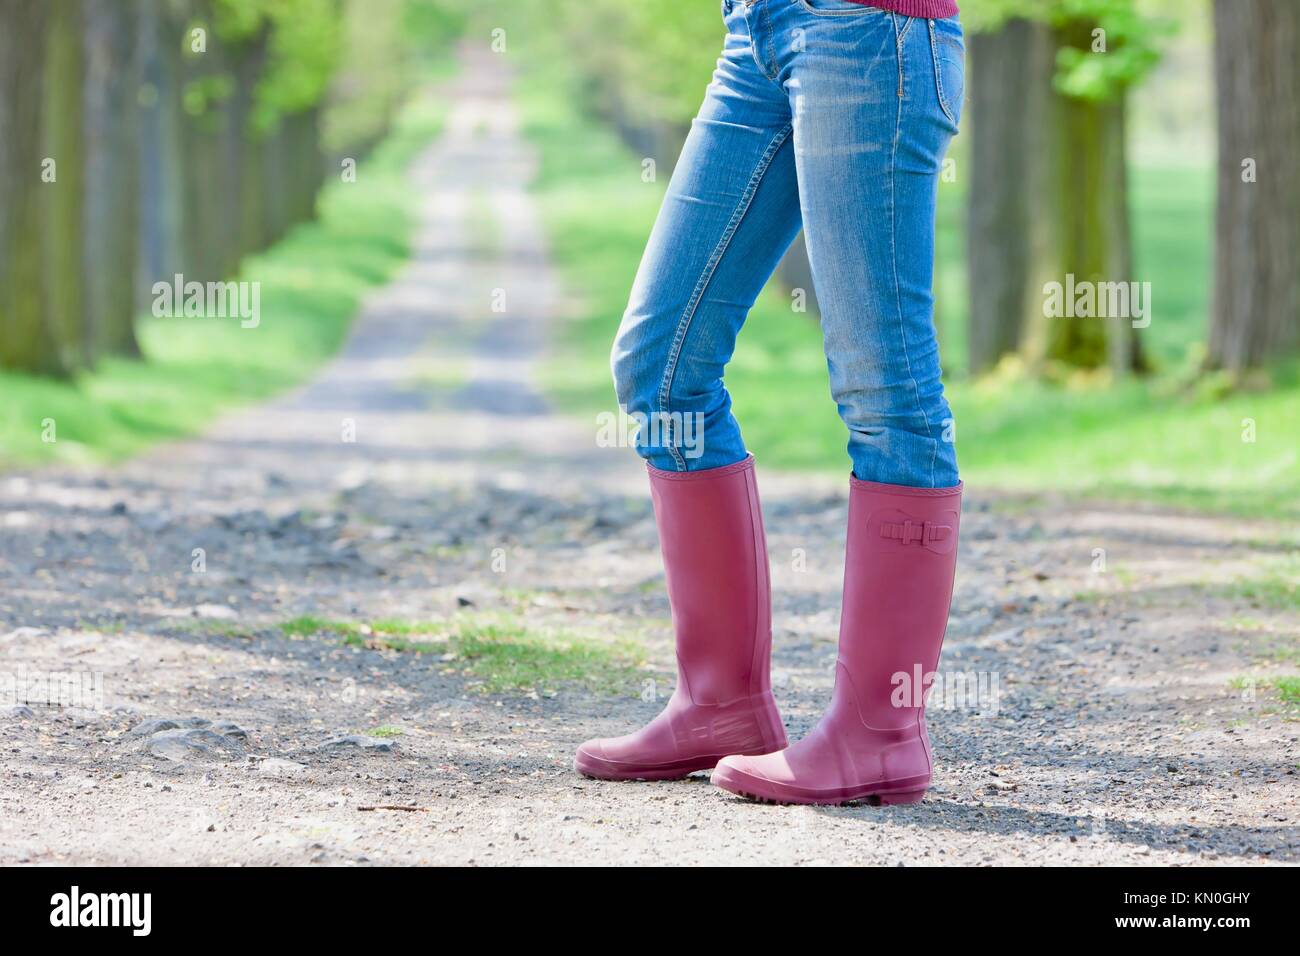 detail of woman wearing rubber boots Stock Photo - Alamy